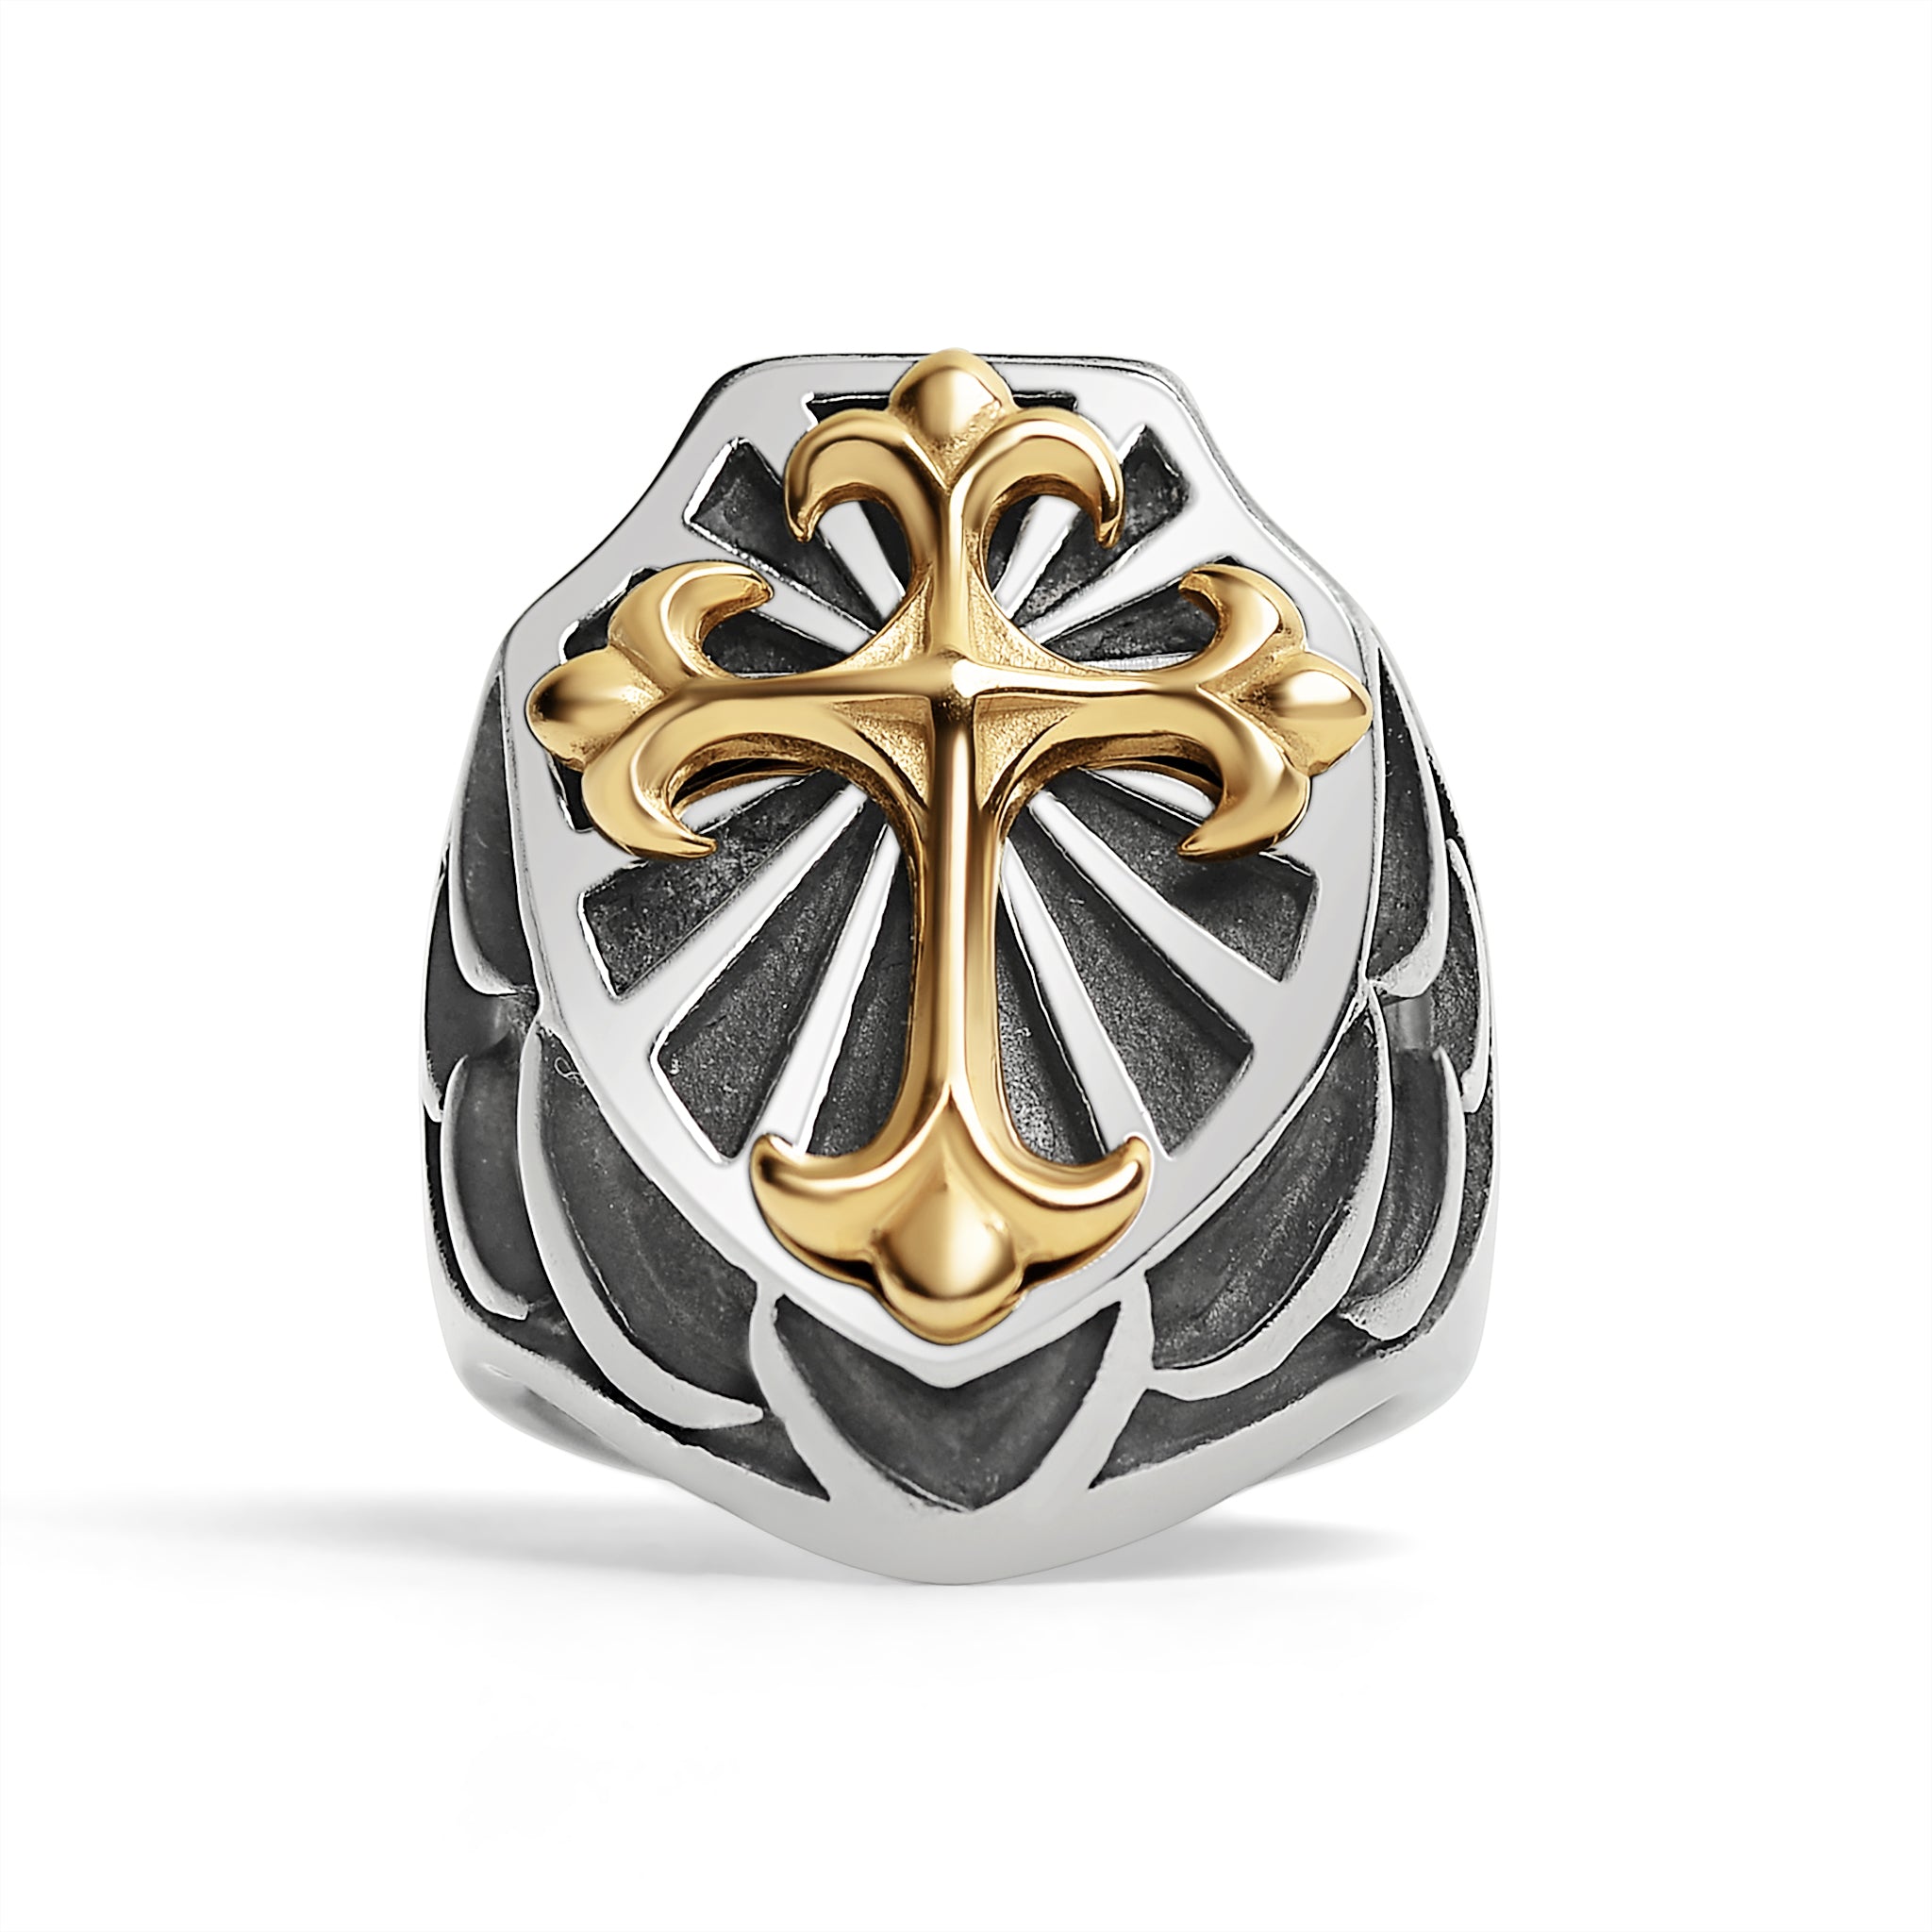 Stainless Steel Gold PVD Cross Shield Signet Ring - Durable and Hypoallergenic - Jewelry & Watches - Bijou Her -  -  - 